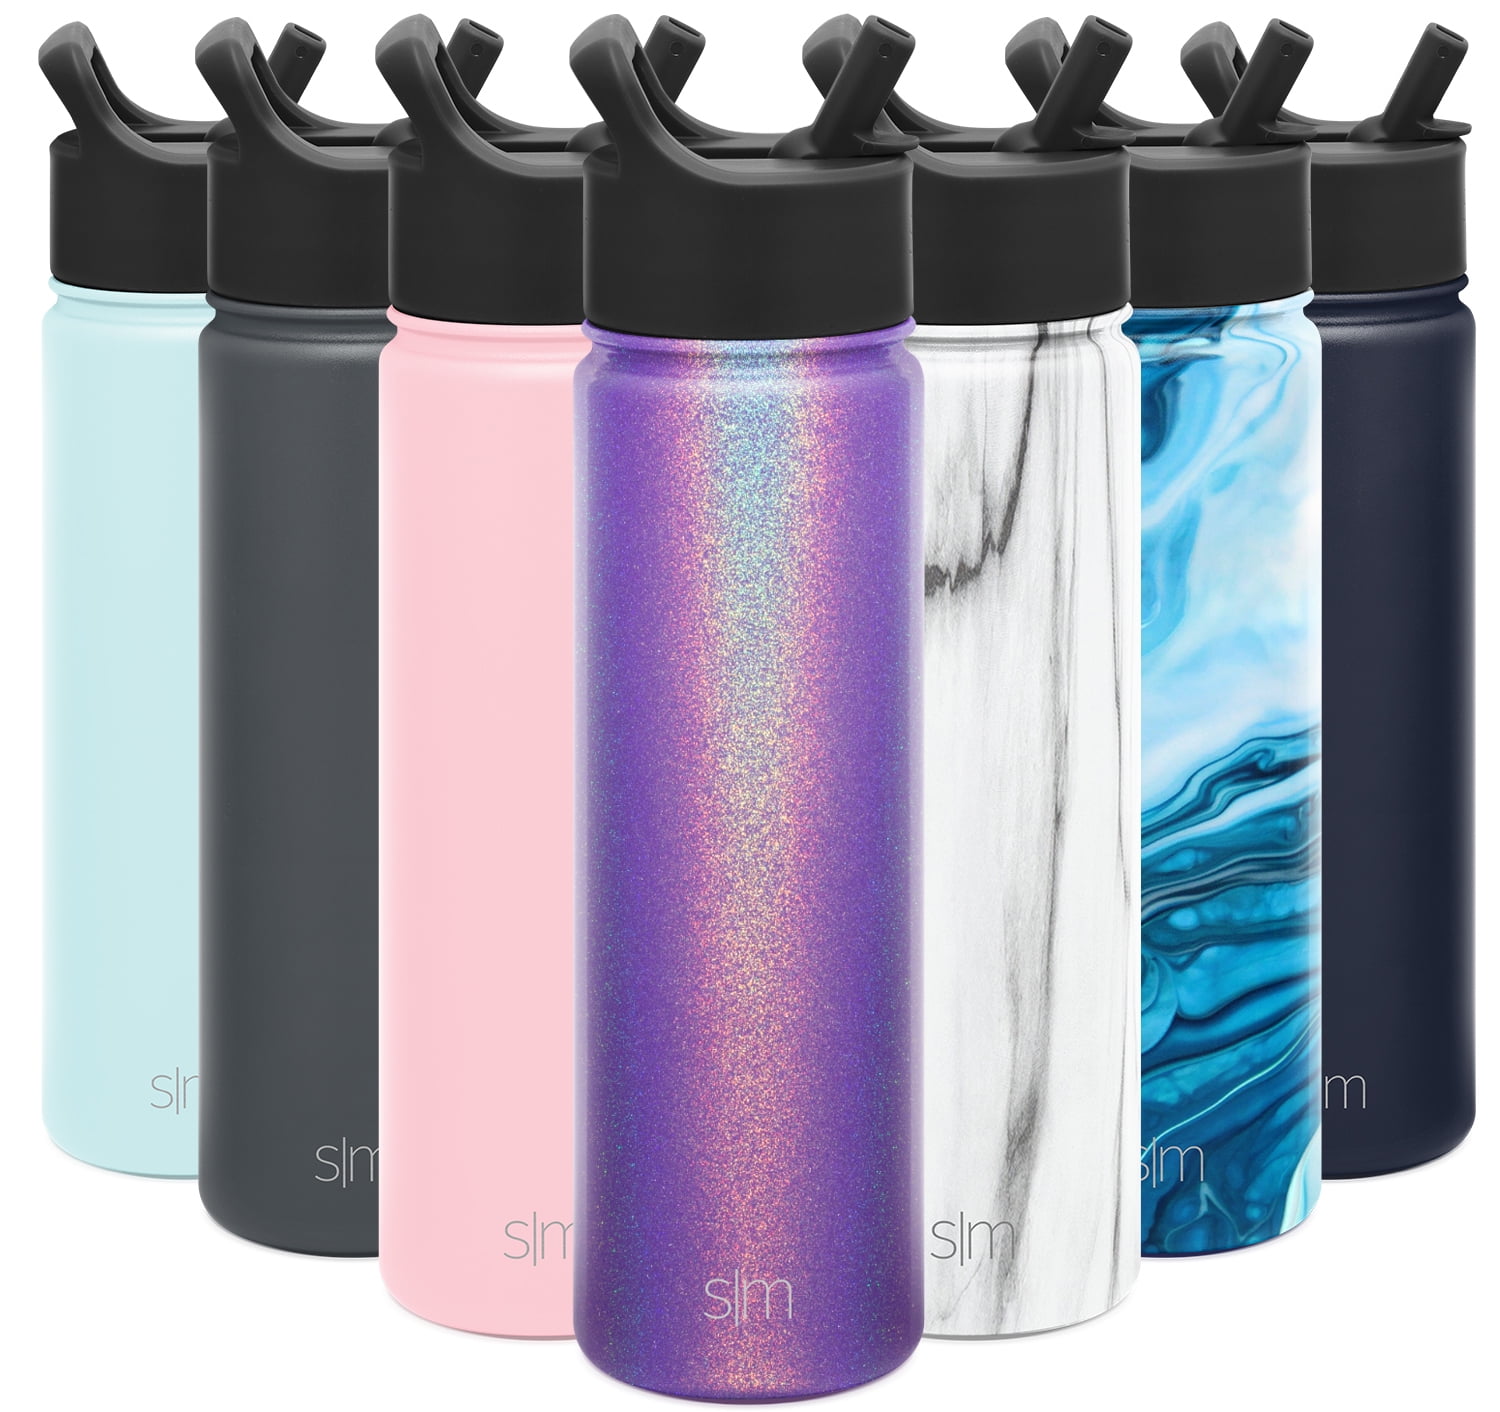 Watermist Stainless Steel Water Bottles with Spray Mist - 22 oz, Double Wall Insulated Water Bottle, Cup Holder Friendly, Leak-Proof Misting Gym 